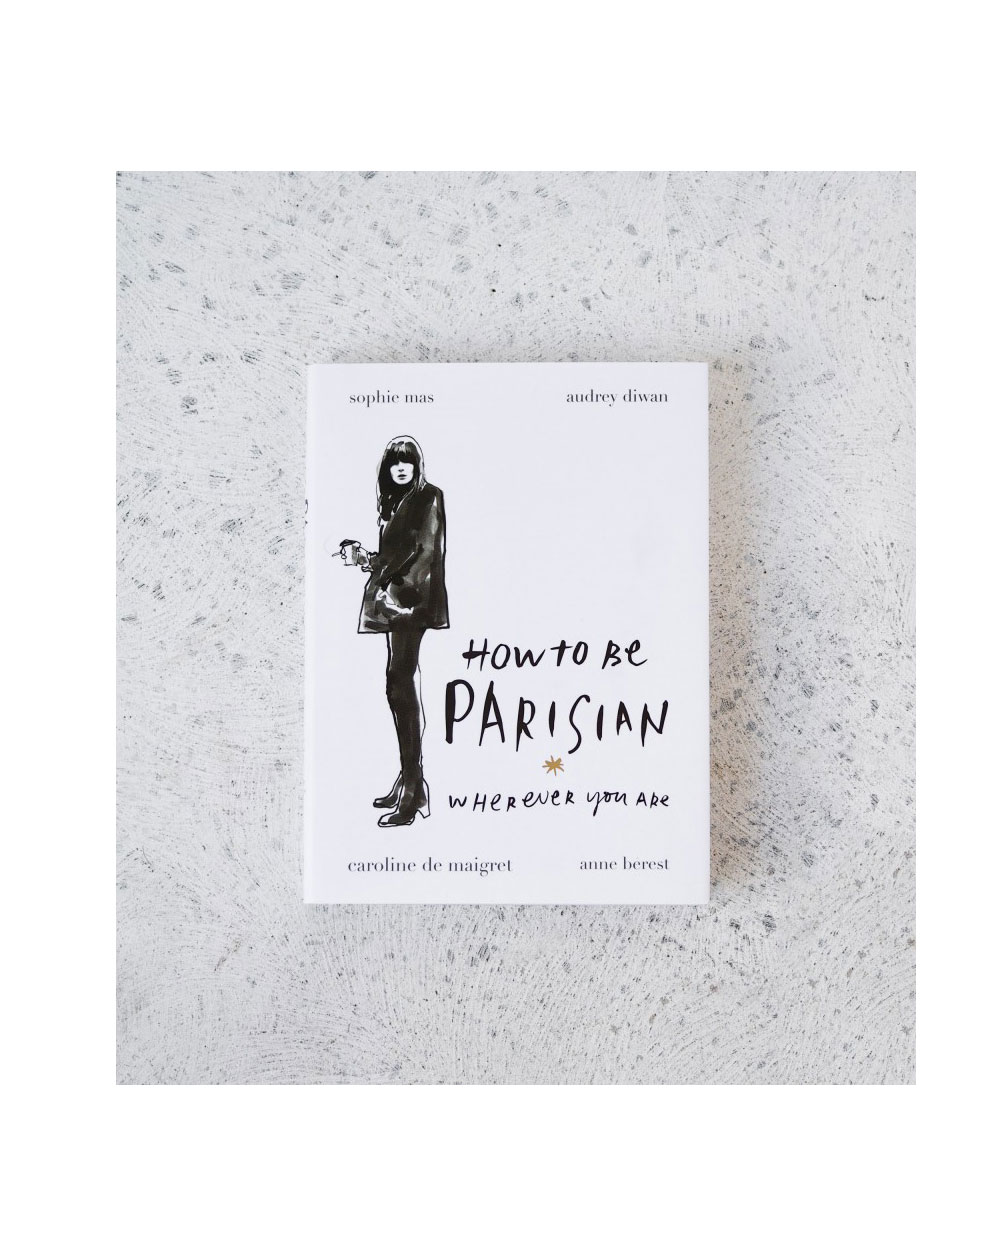 How-to-be-Parisian-book-from-Indie-Home-Collective_$40